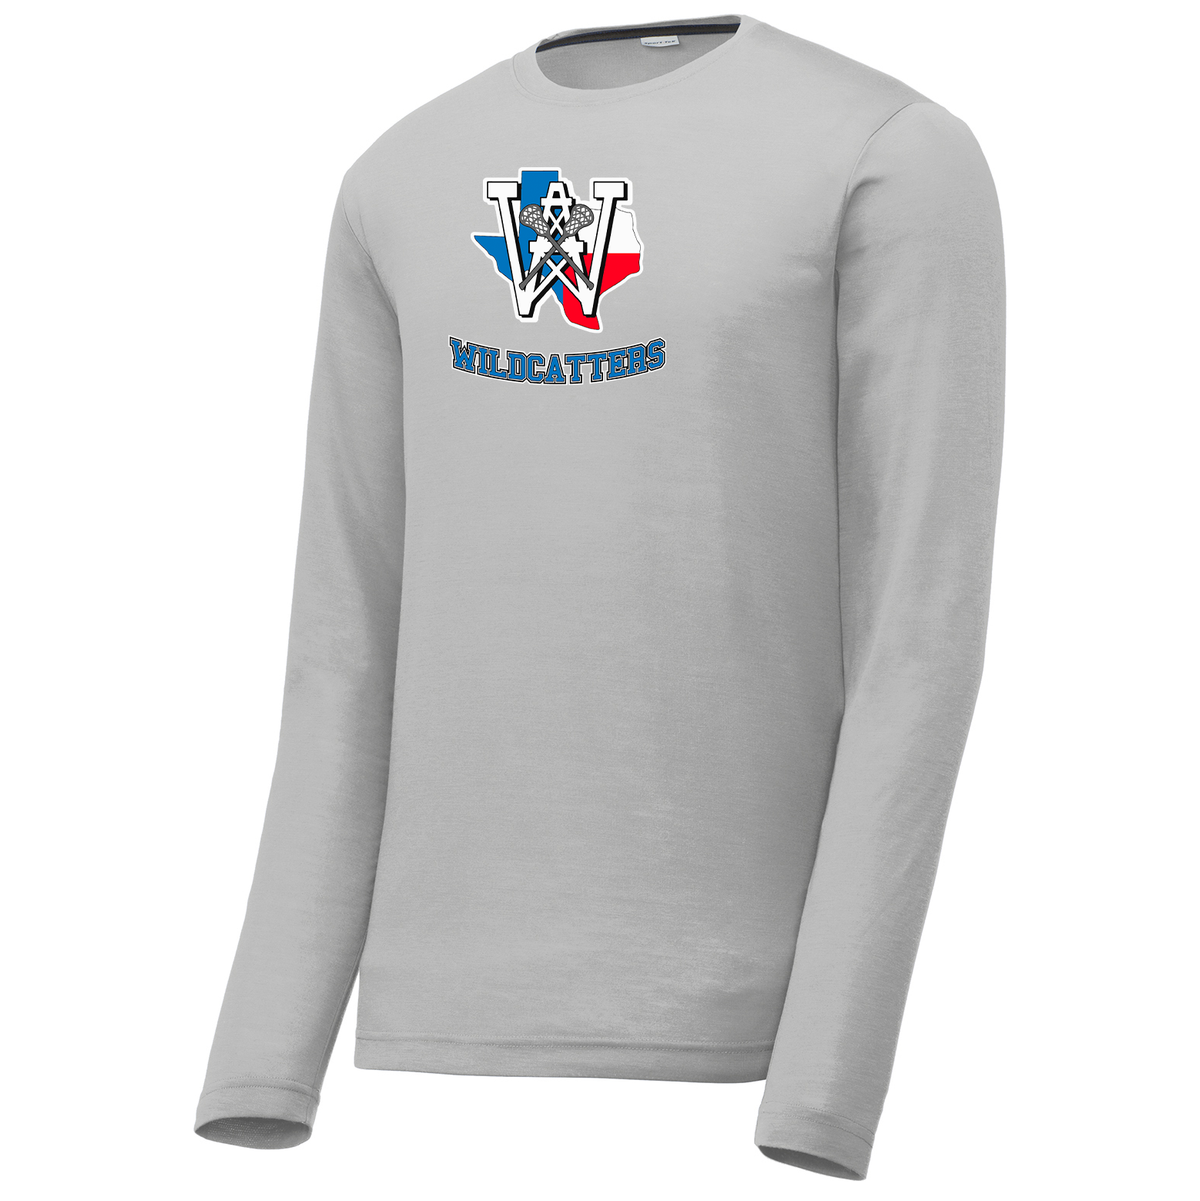 Wildcatters Lax Long Sleeve CottonTouch Performance Shirt